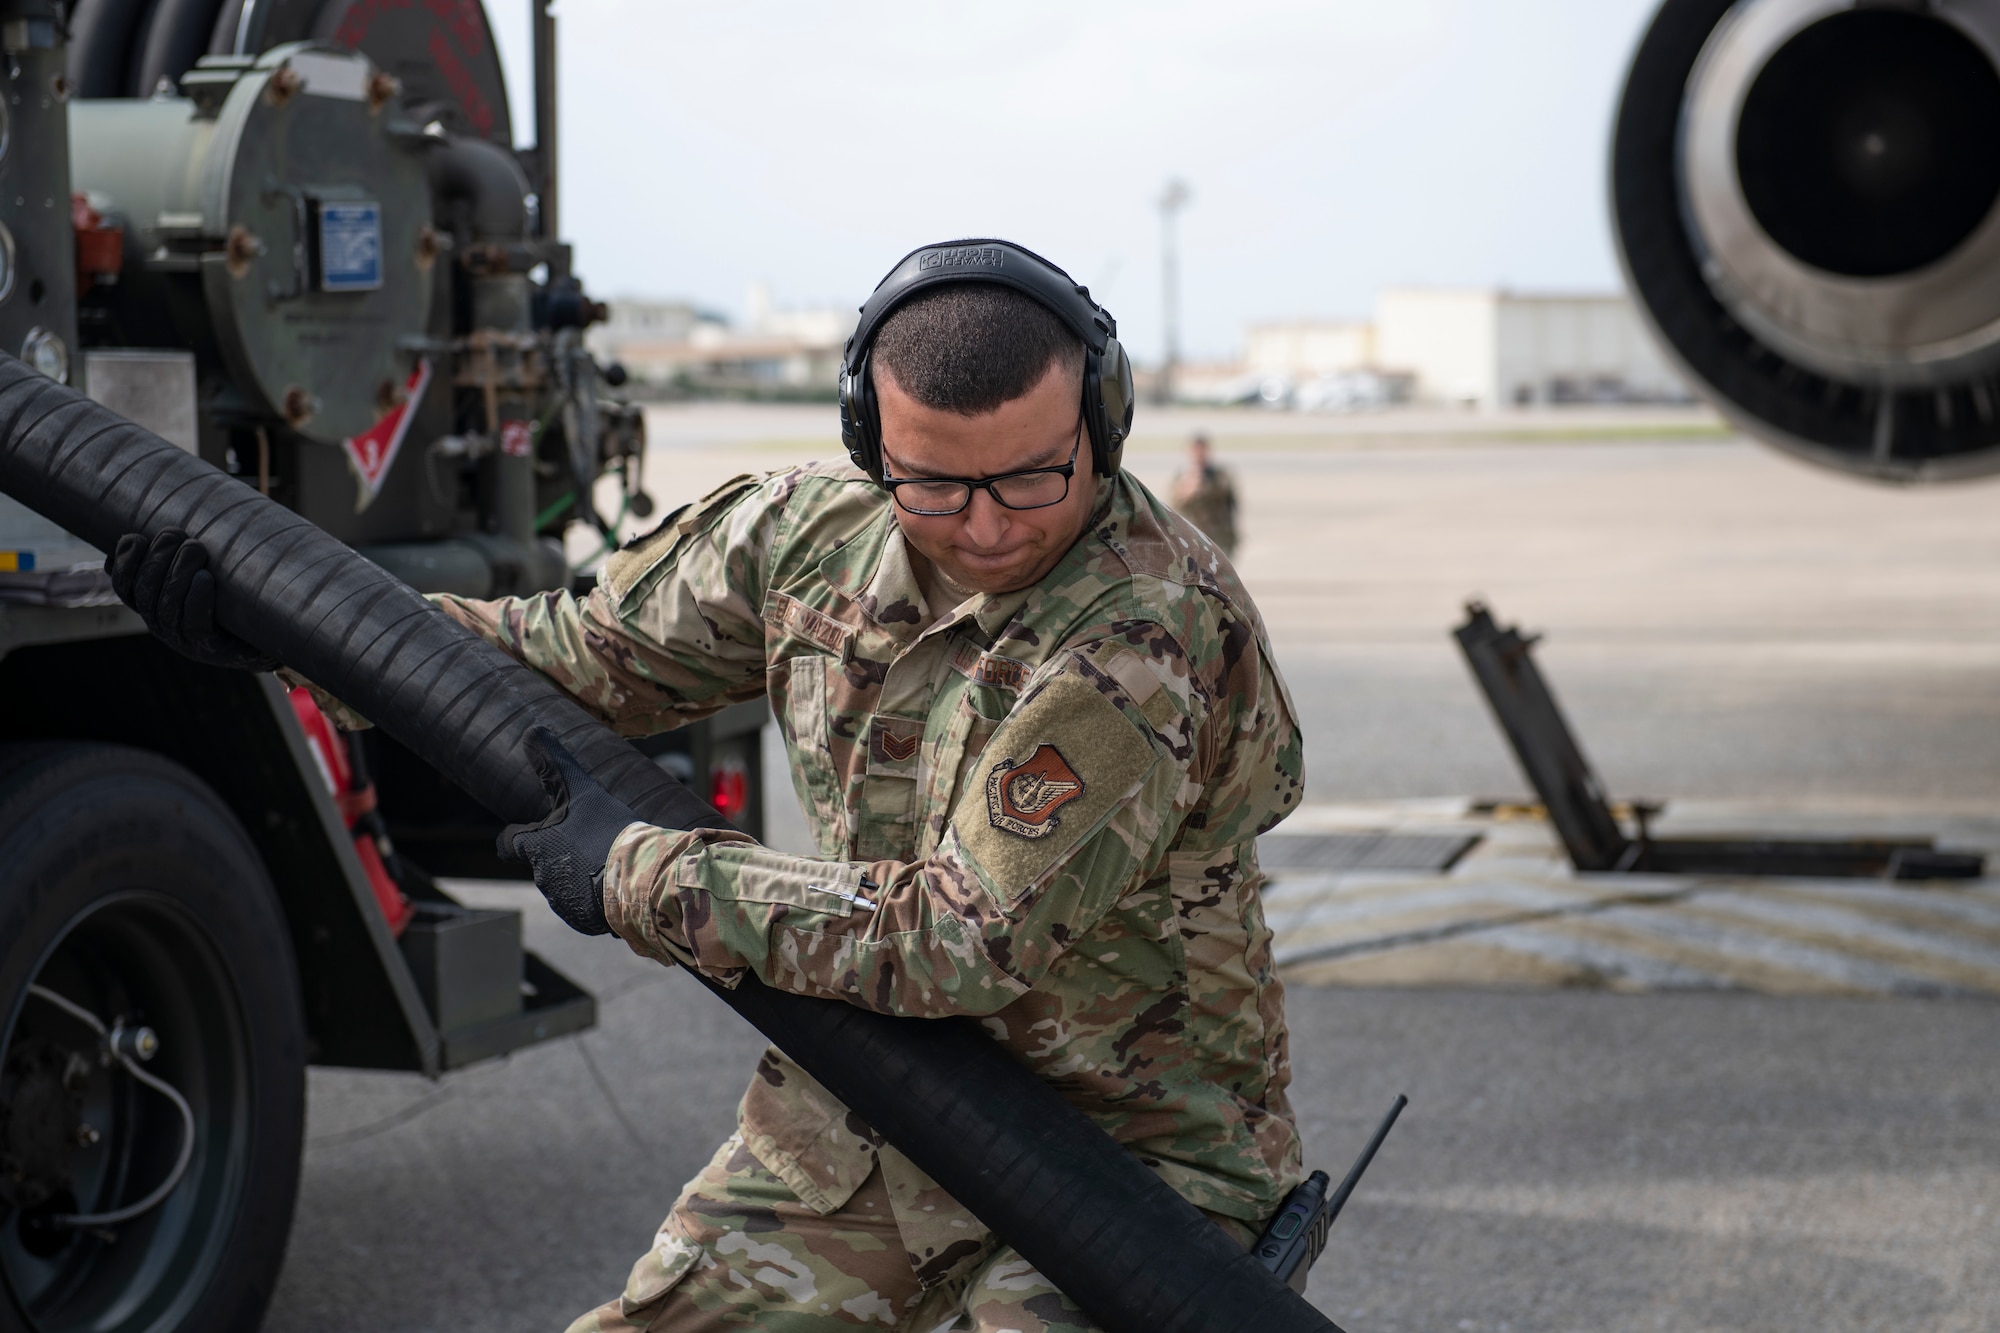 U.S. Air Force Staff Sgt. Elisamuel Saezvazquez, 18th Logistics Readiness Squadron fuels service center supervisor, pulls an R-12 refueling truck hose at Kadena Air Base, Japan, Oct. 13, 2022. Airmen from the 18th Wing conducted the first hot-pit refueling of a KC-46A Pegasus at Kadena while also gaining familiarization with the aircraft, increasing Kadena’s ability to support the Indo-Pacific region. (U.S. Air Force photo by Senior Airman Jessi Roth)